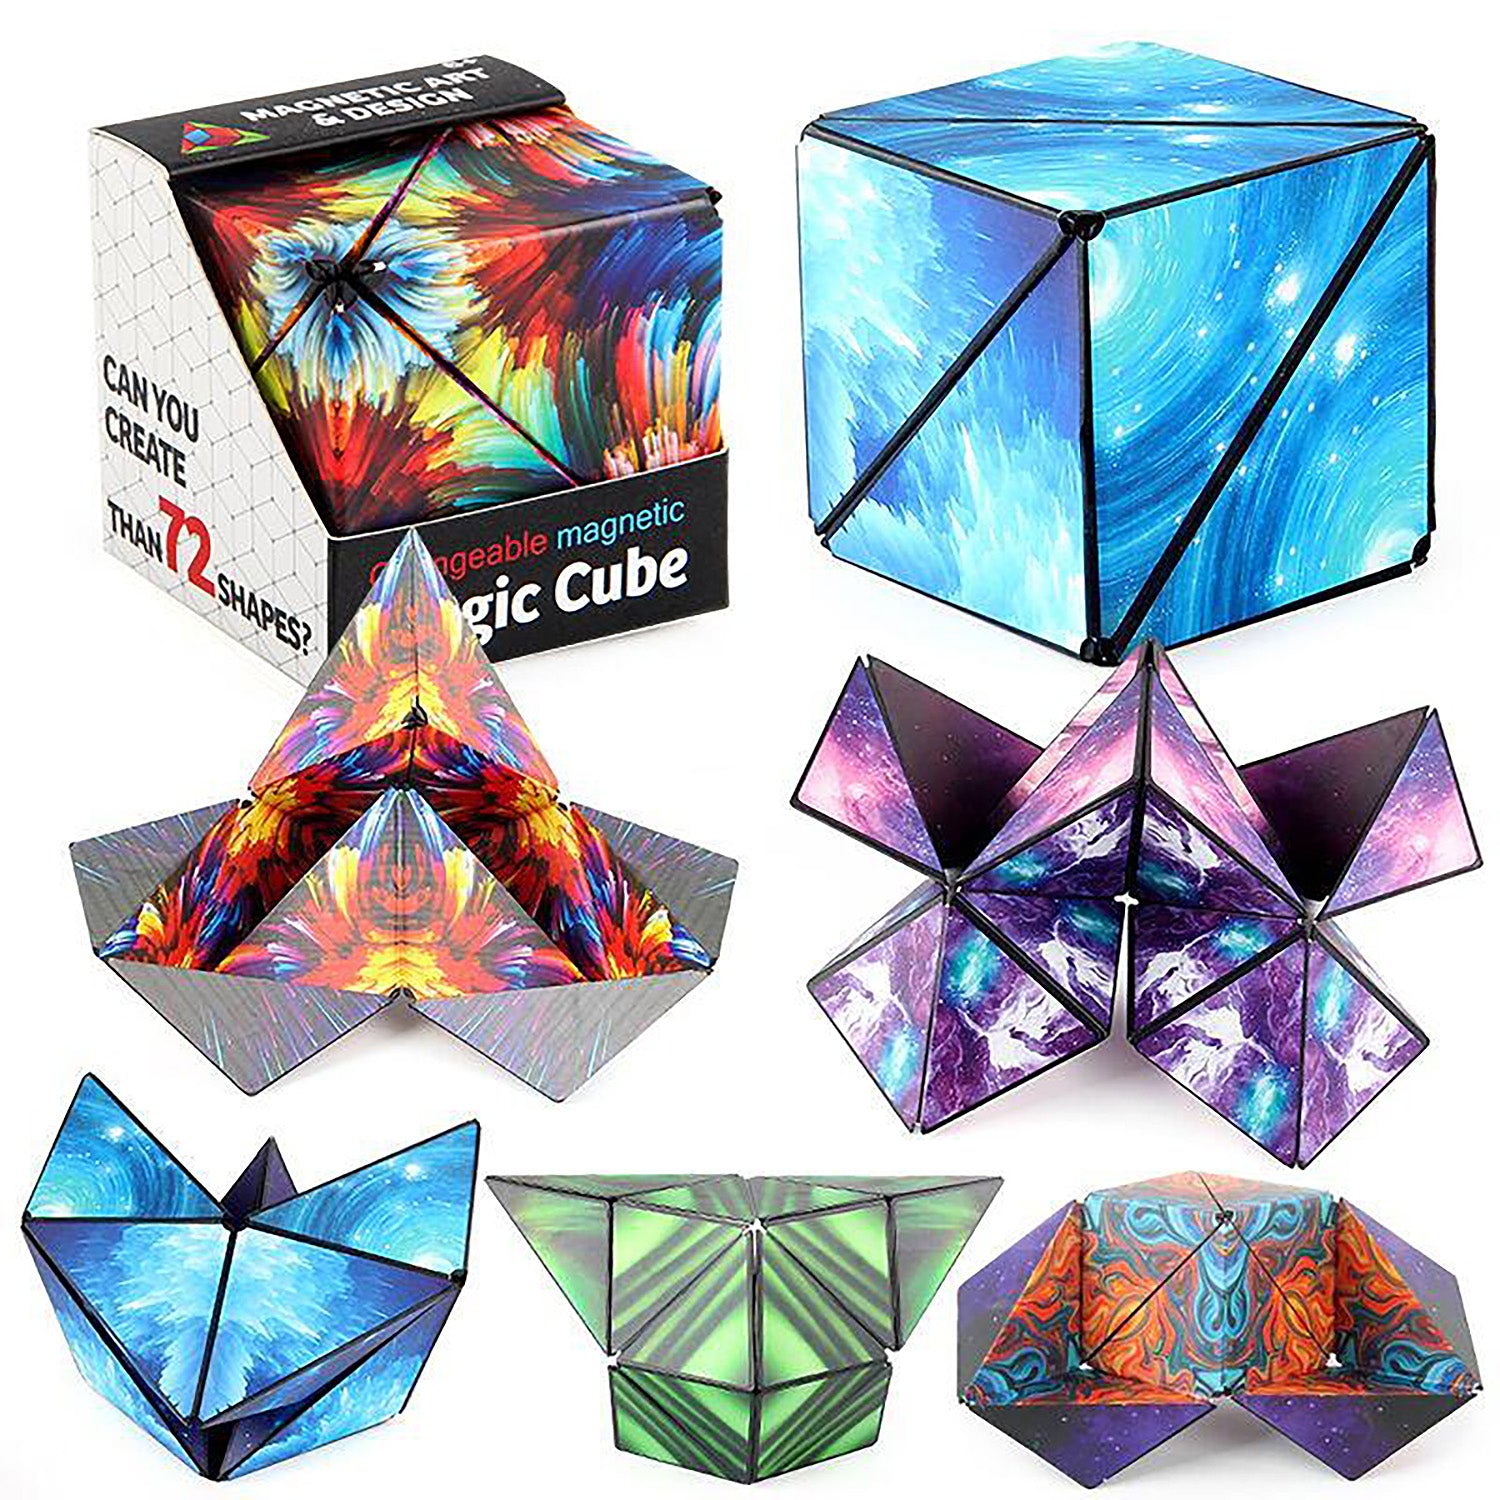 3D Changeable Magnetic Magic Cube, Shape Shifting Box Fidget Toy (Spaced Out Version)